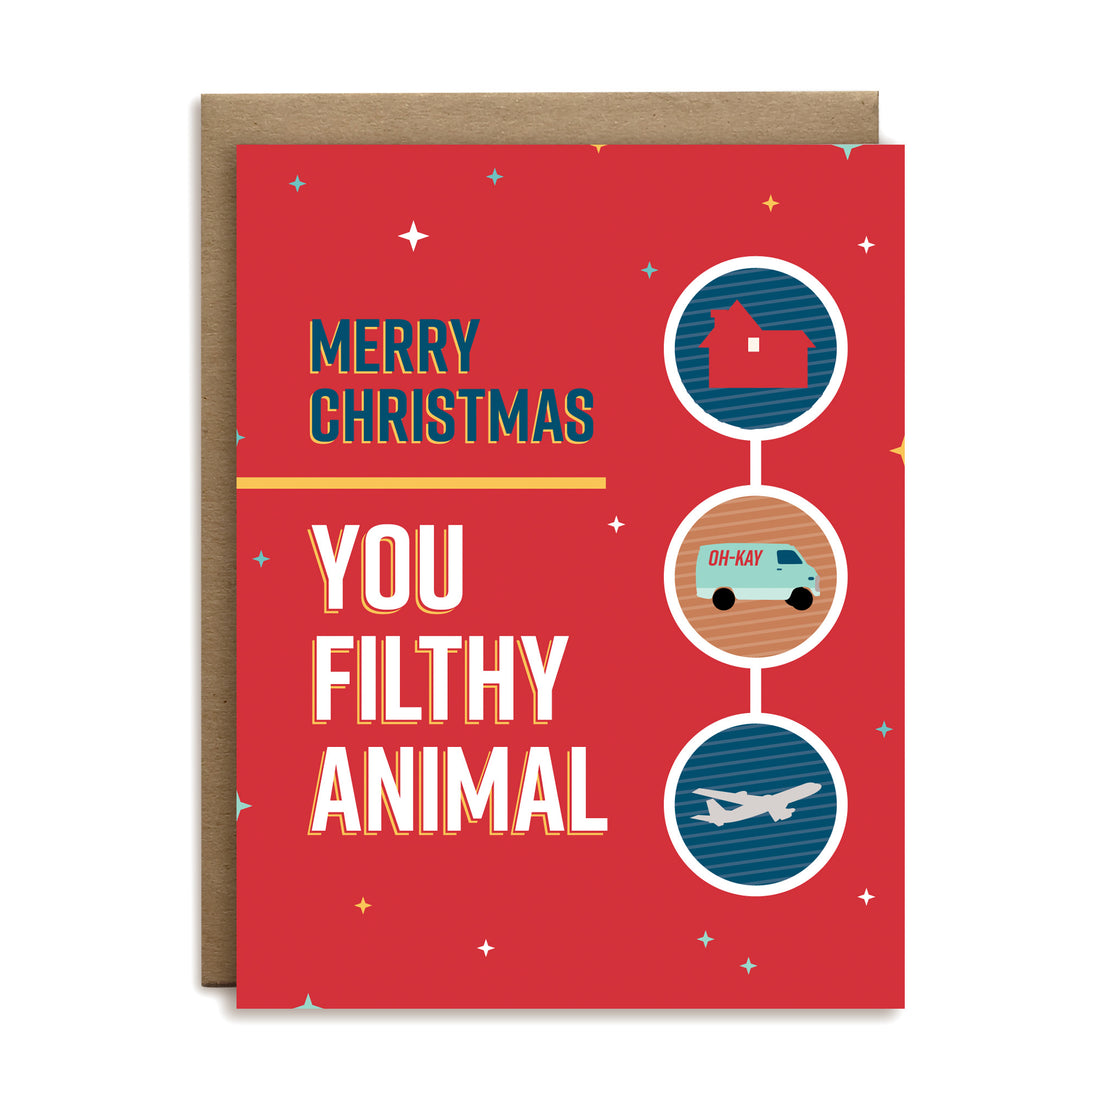 Merry Christmas you filthy animal greeting card by I’ll Know It When I See It